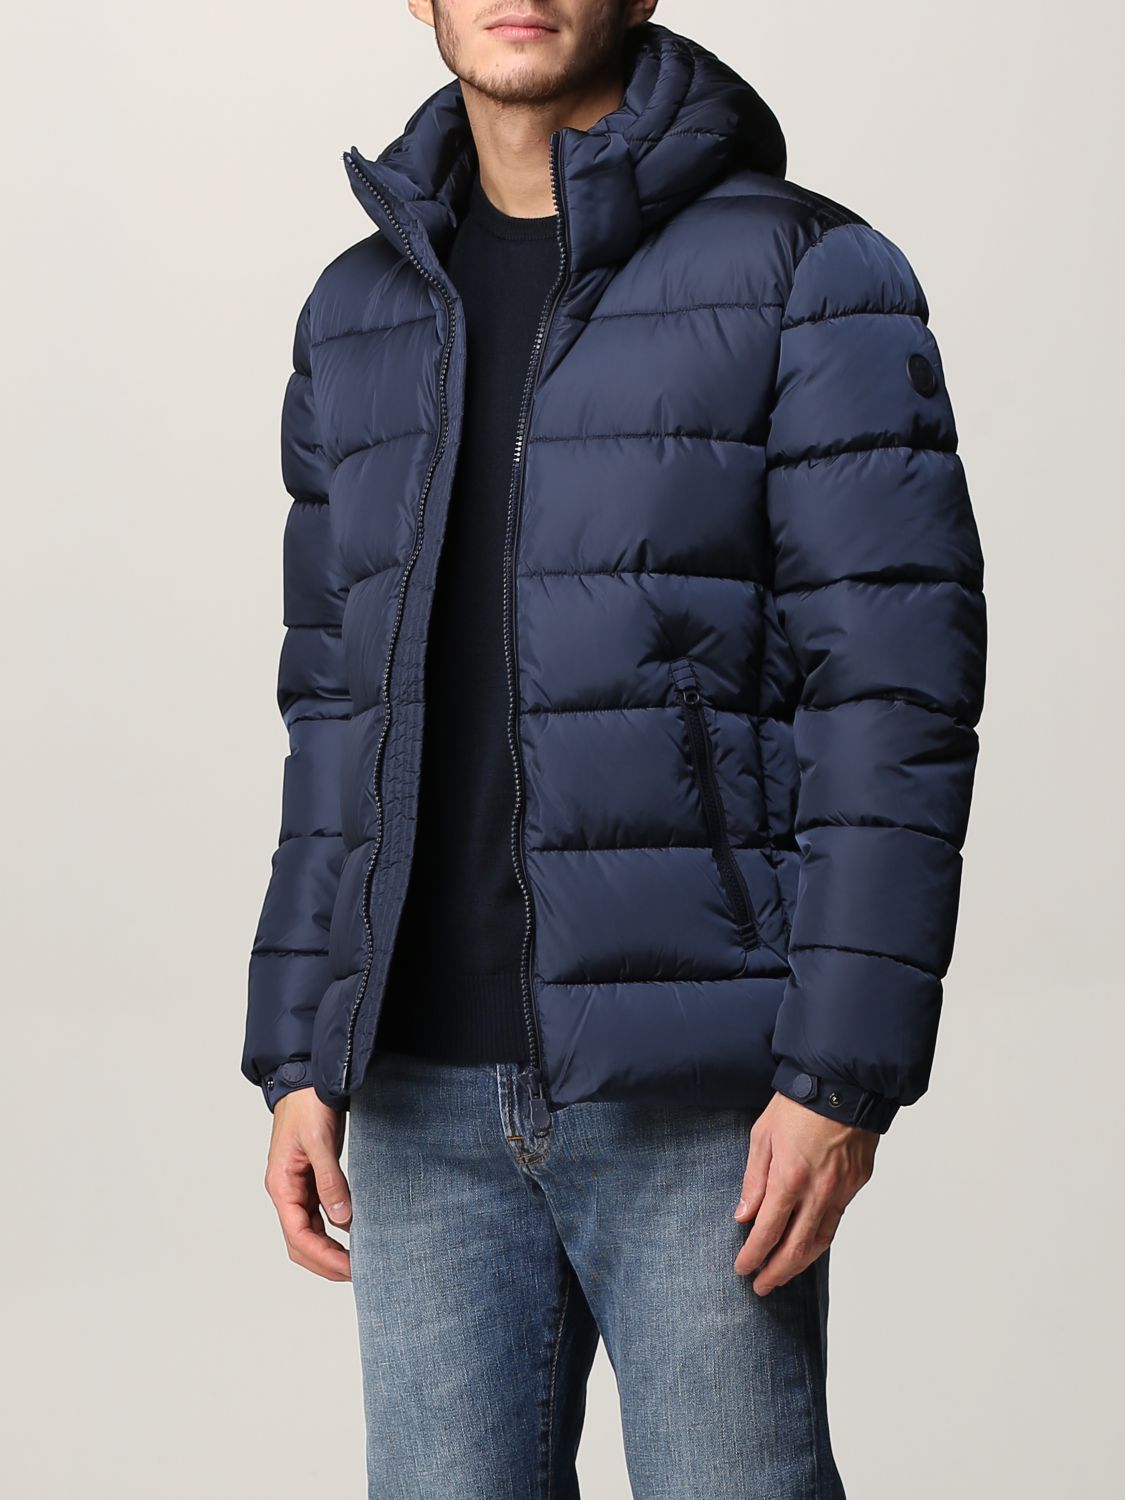 Jacket Save The Duck: Save The Duck jacket for man navy 3